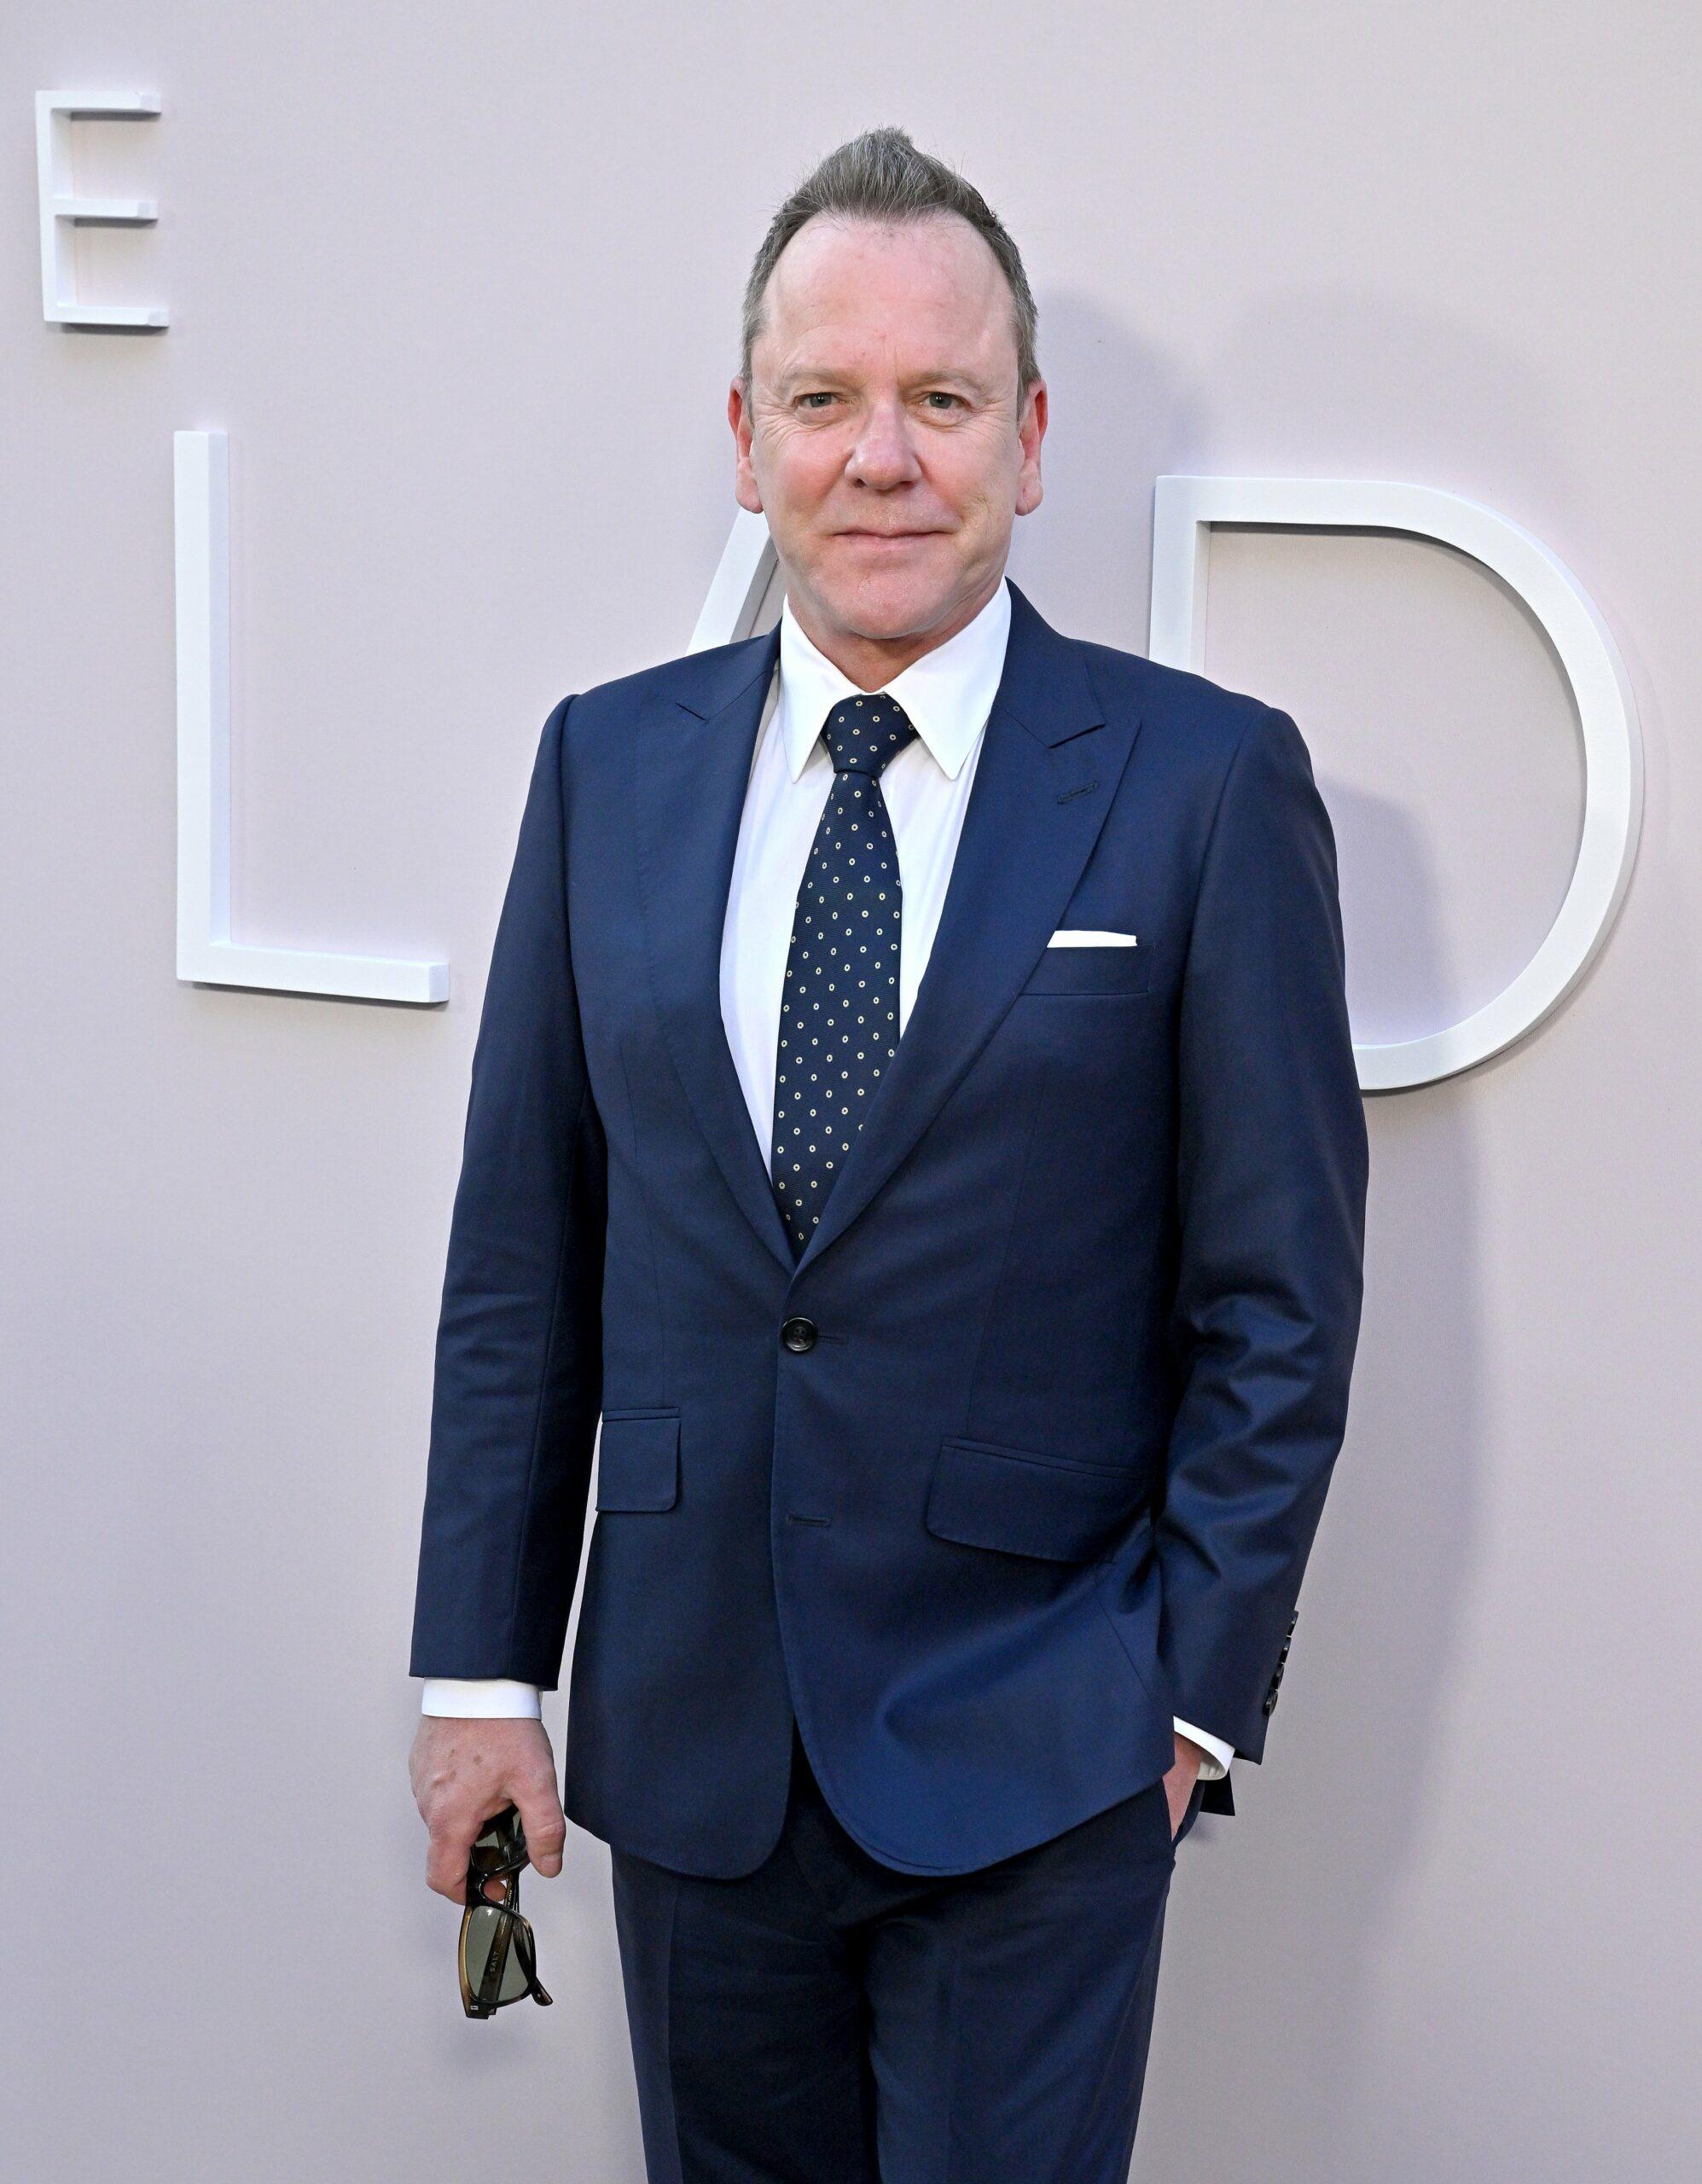 Kiefer Sutherland at "The First Lady" Premiere